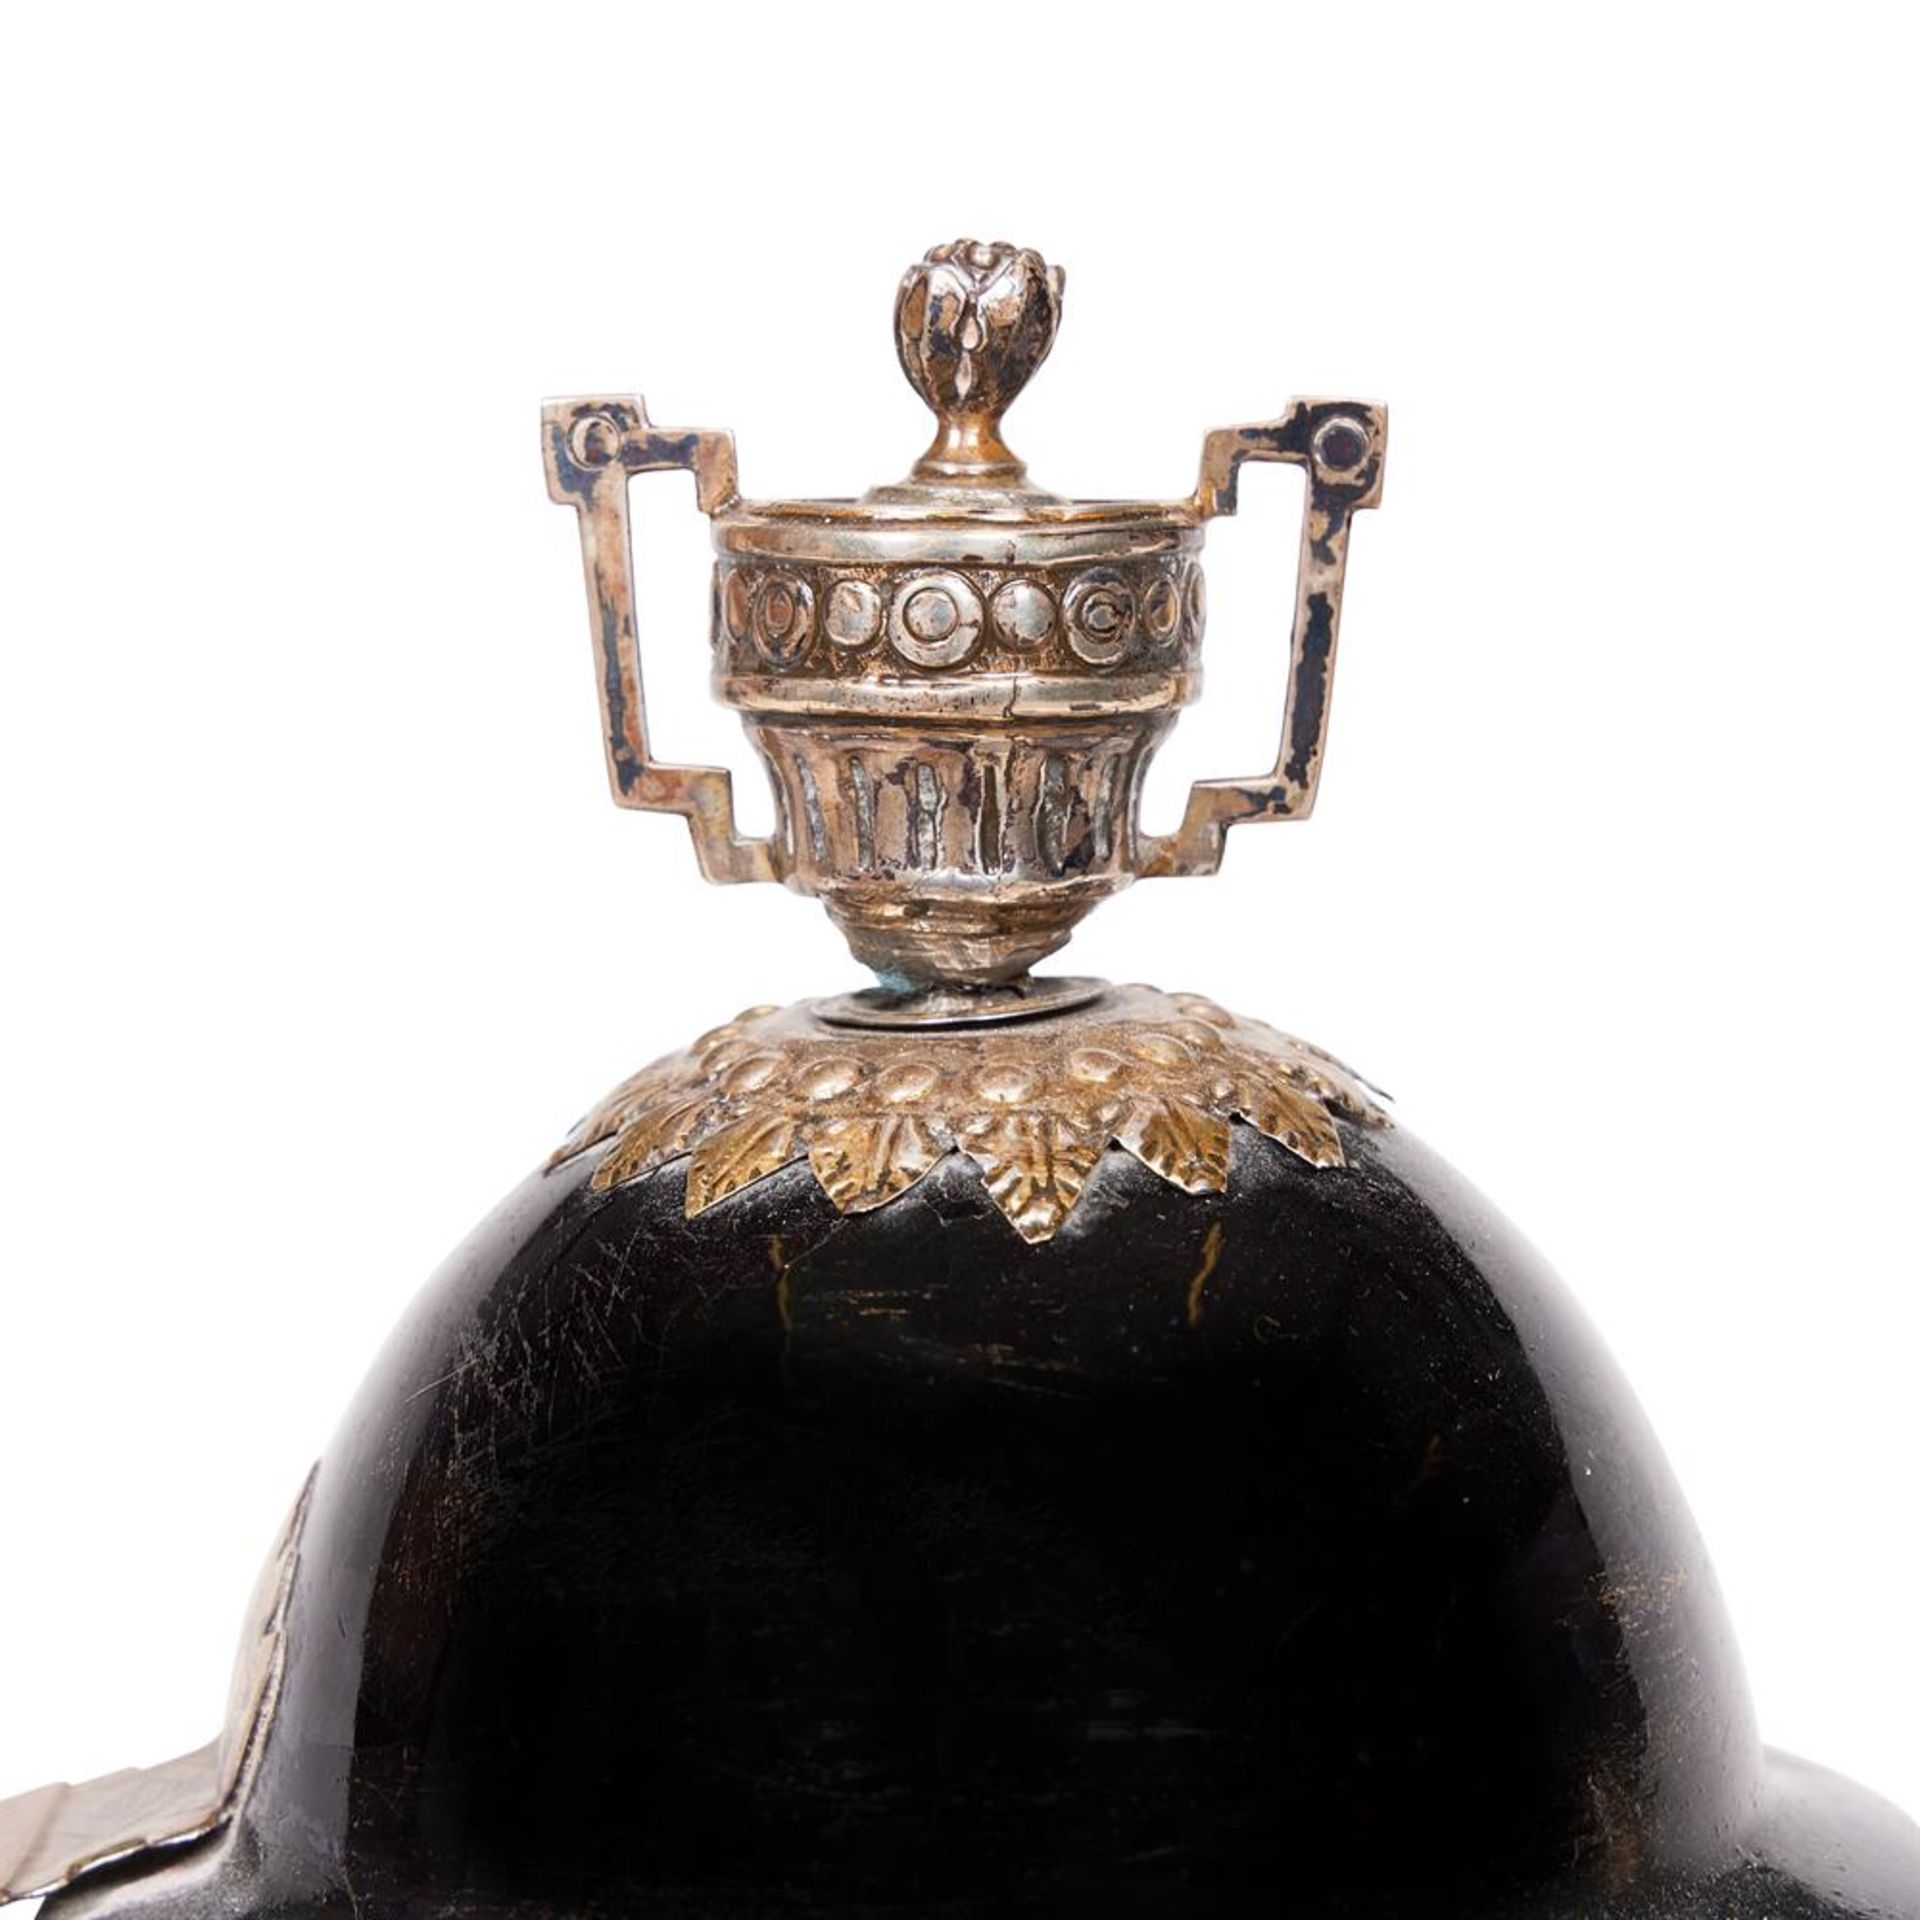 A LOW COUNTRIES SILVER MOUNTED BLACK GLAZED POTTERY BALUSTER COFFEE AND COVER, (TERRE DE NAMUR) - Image 2 of 2